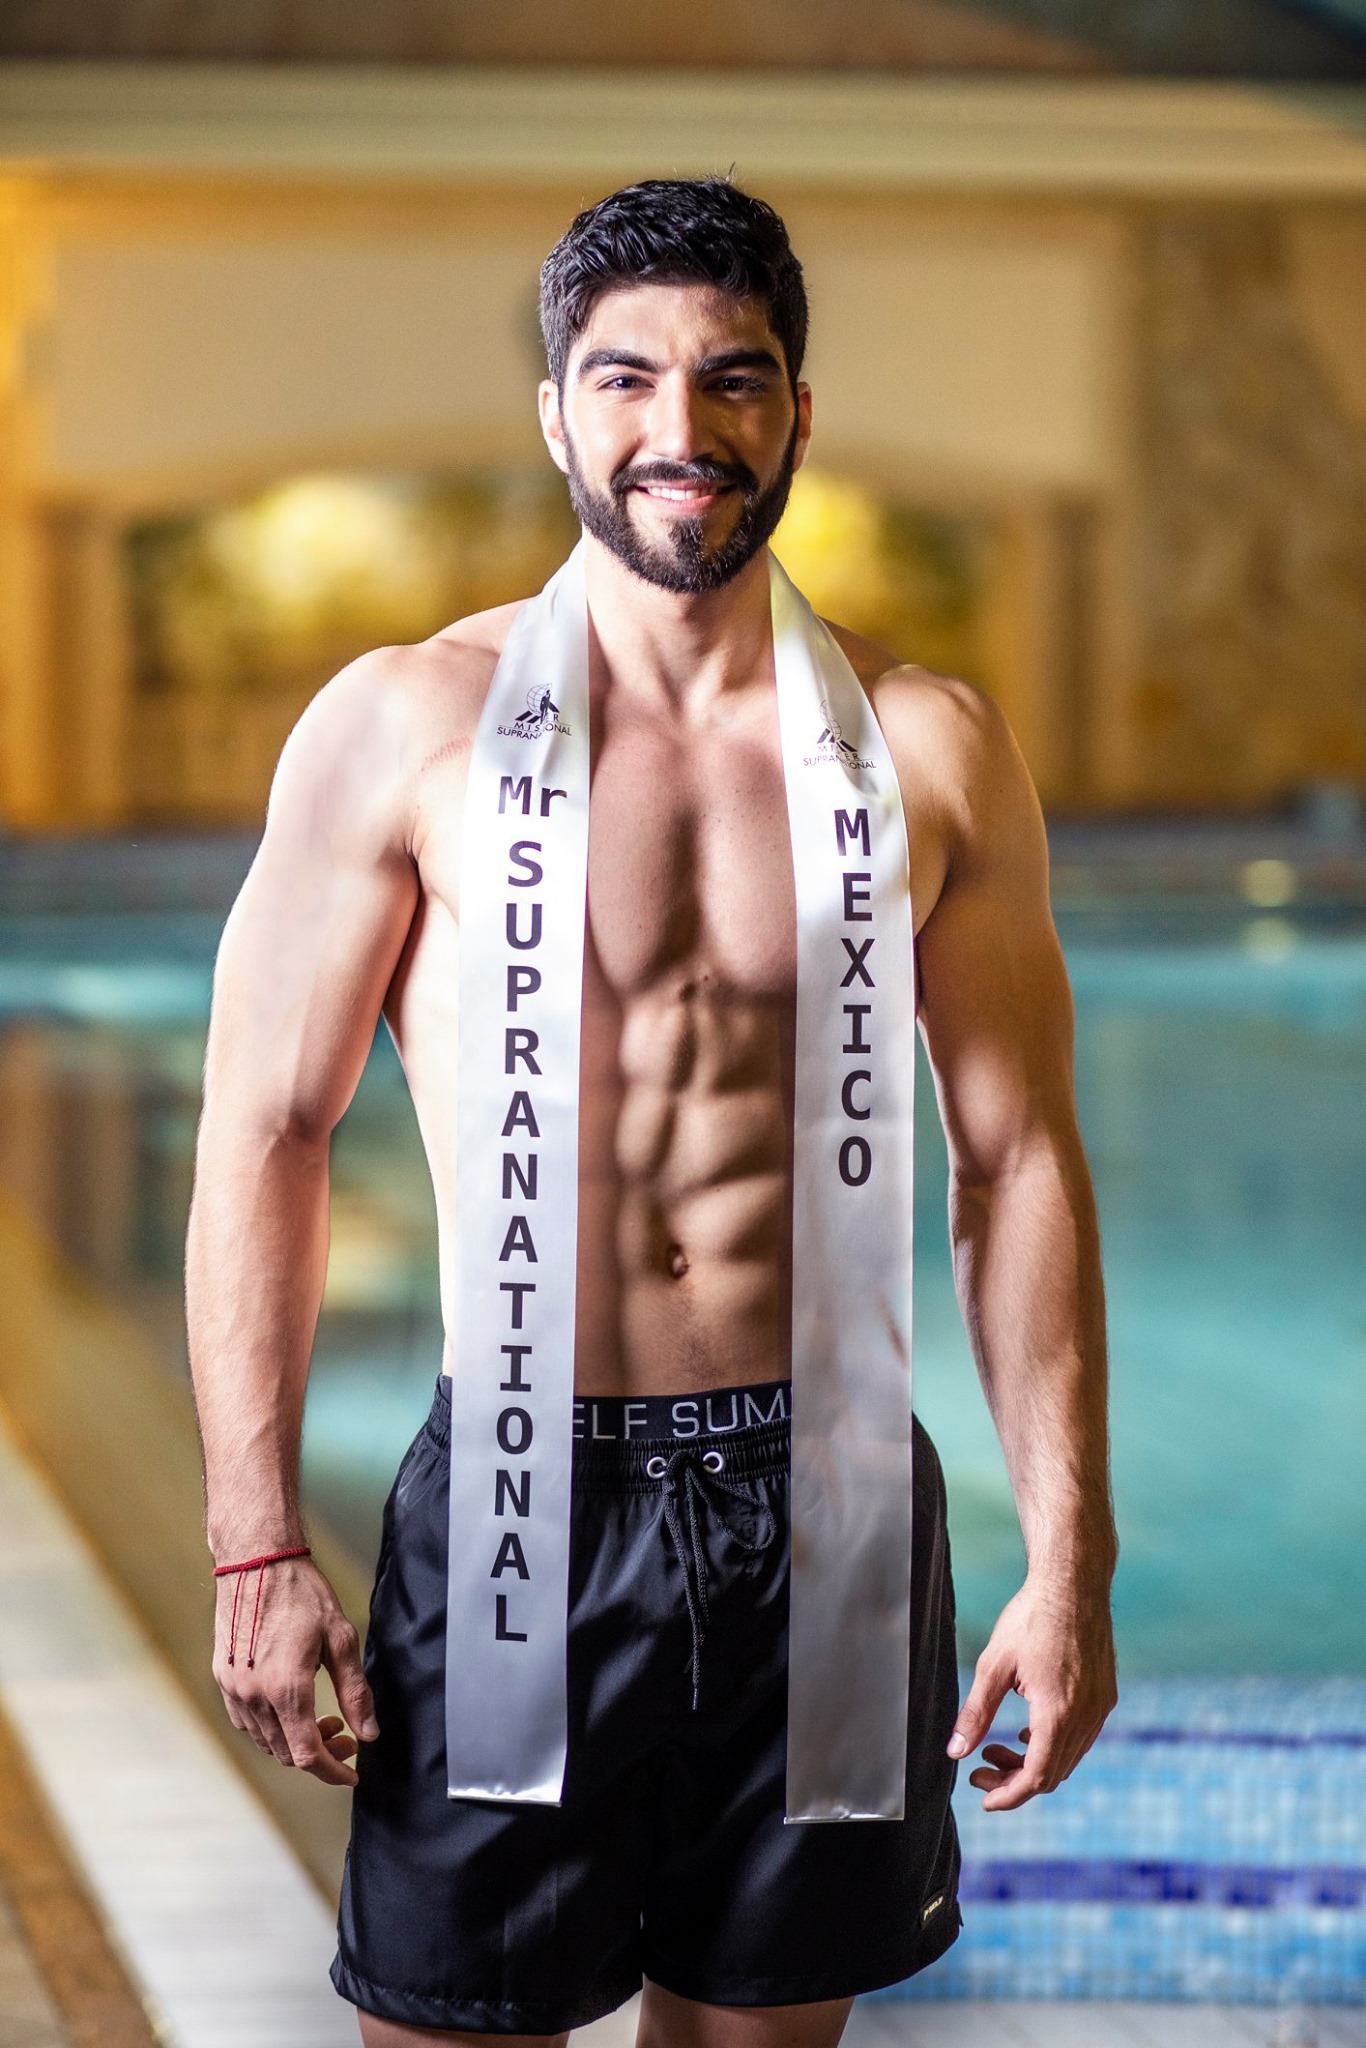 Mister Supranational 2019 Official Swimwear 317